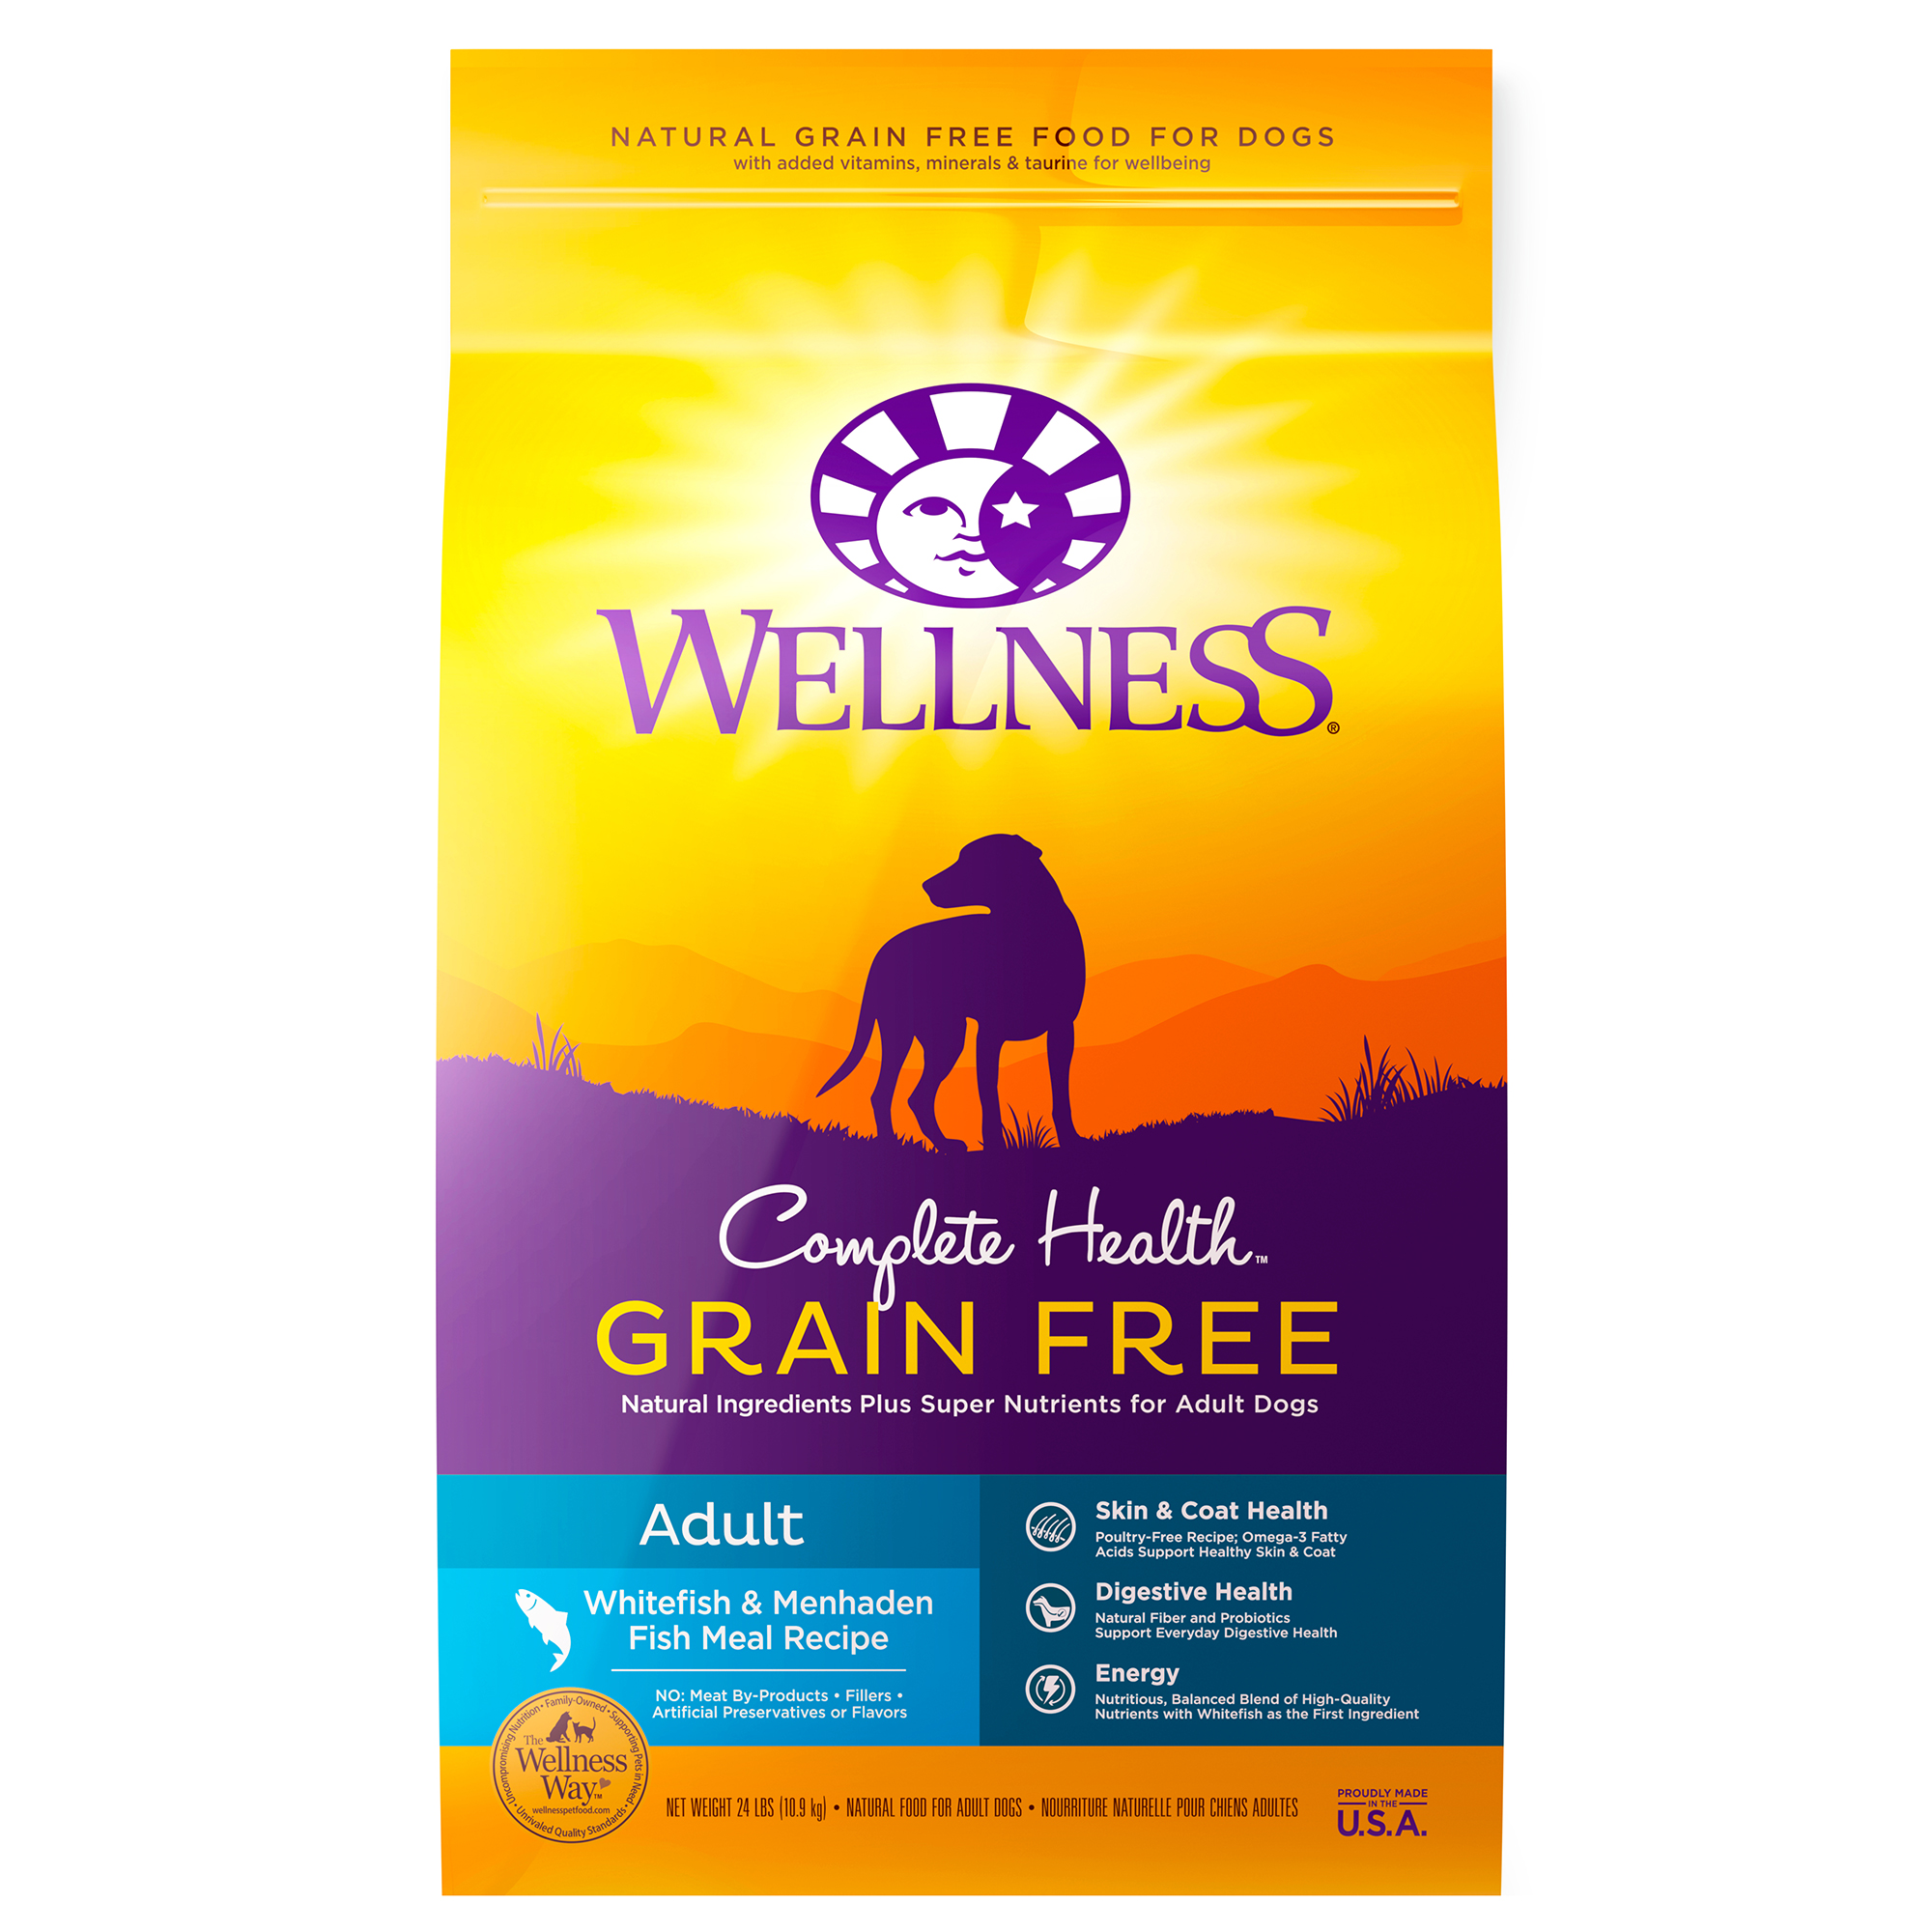 Wellness Complete Health Natural Grain Free Dry Dog Food, Whitefish Recipe, 24-Pound Bag - image 1 of 9